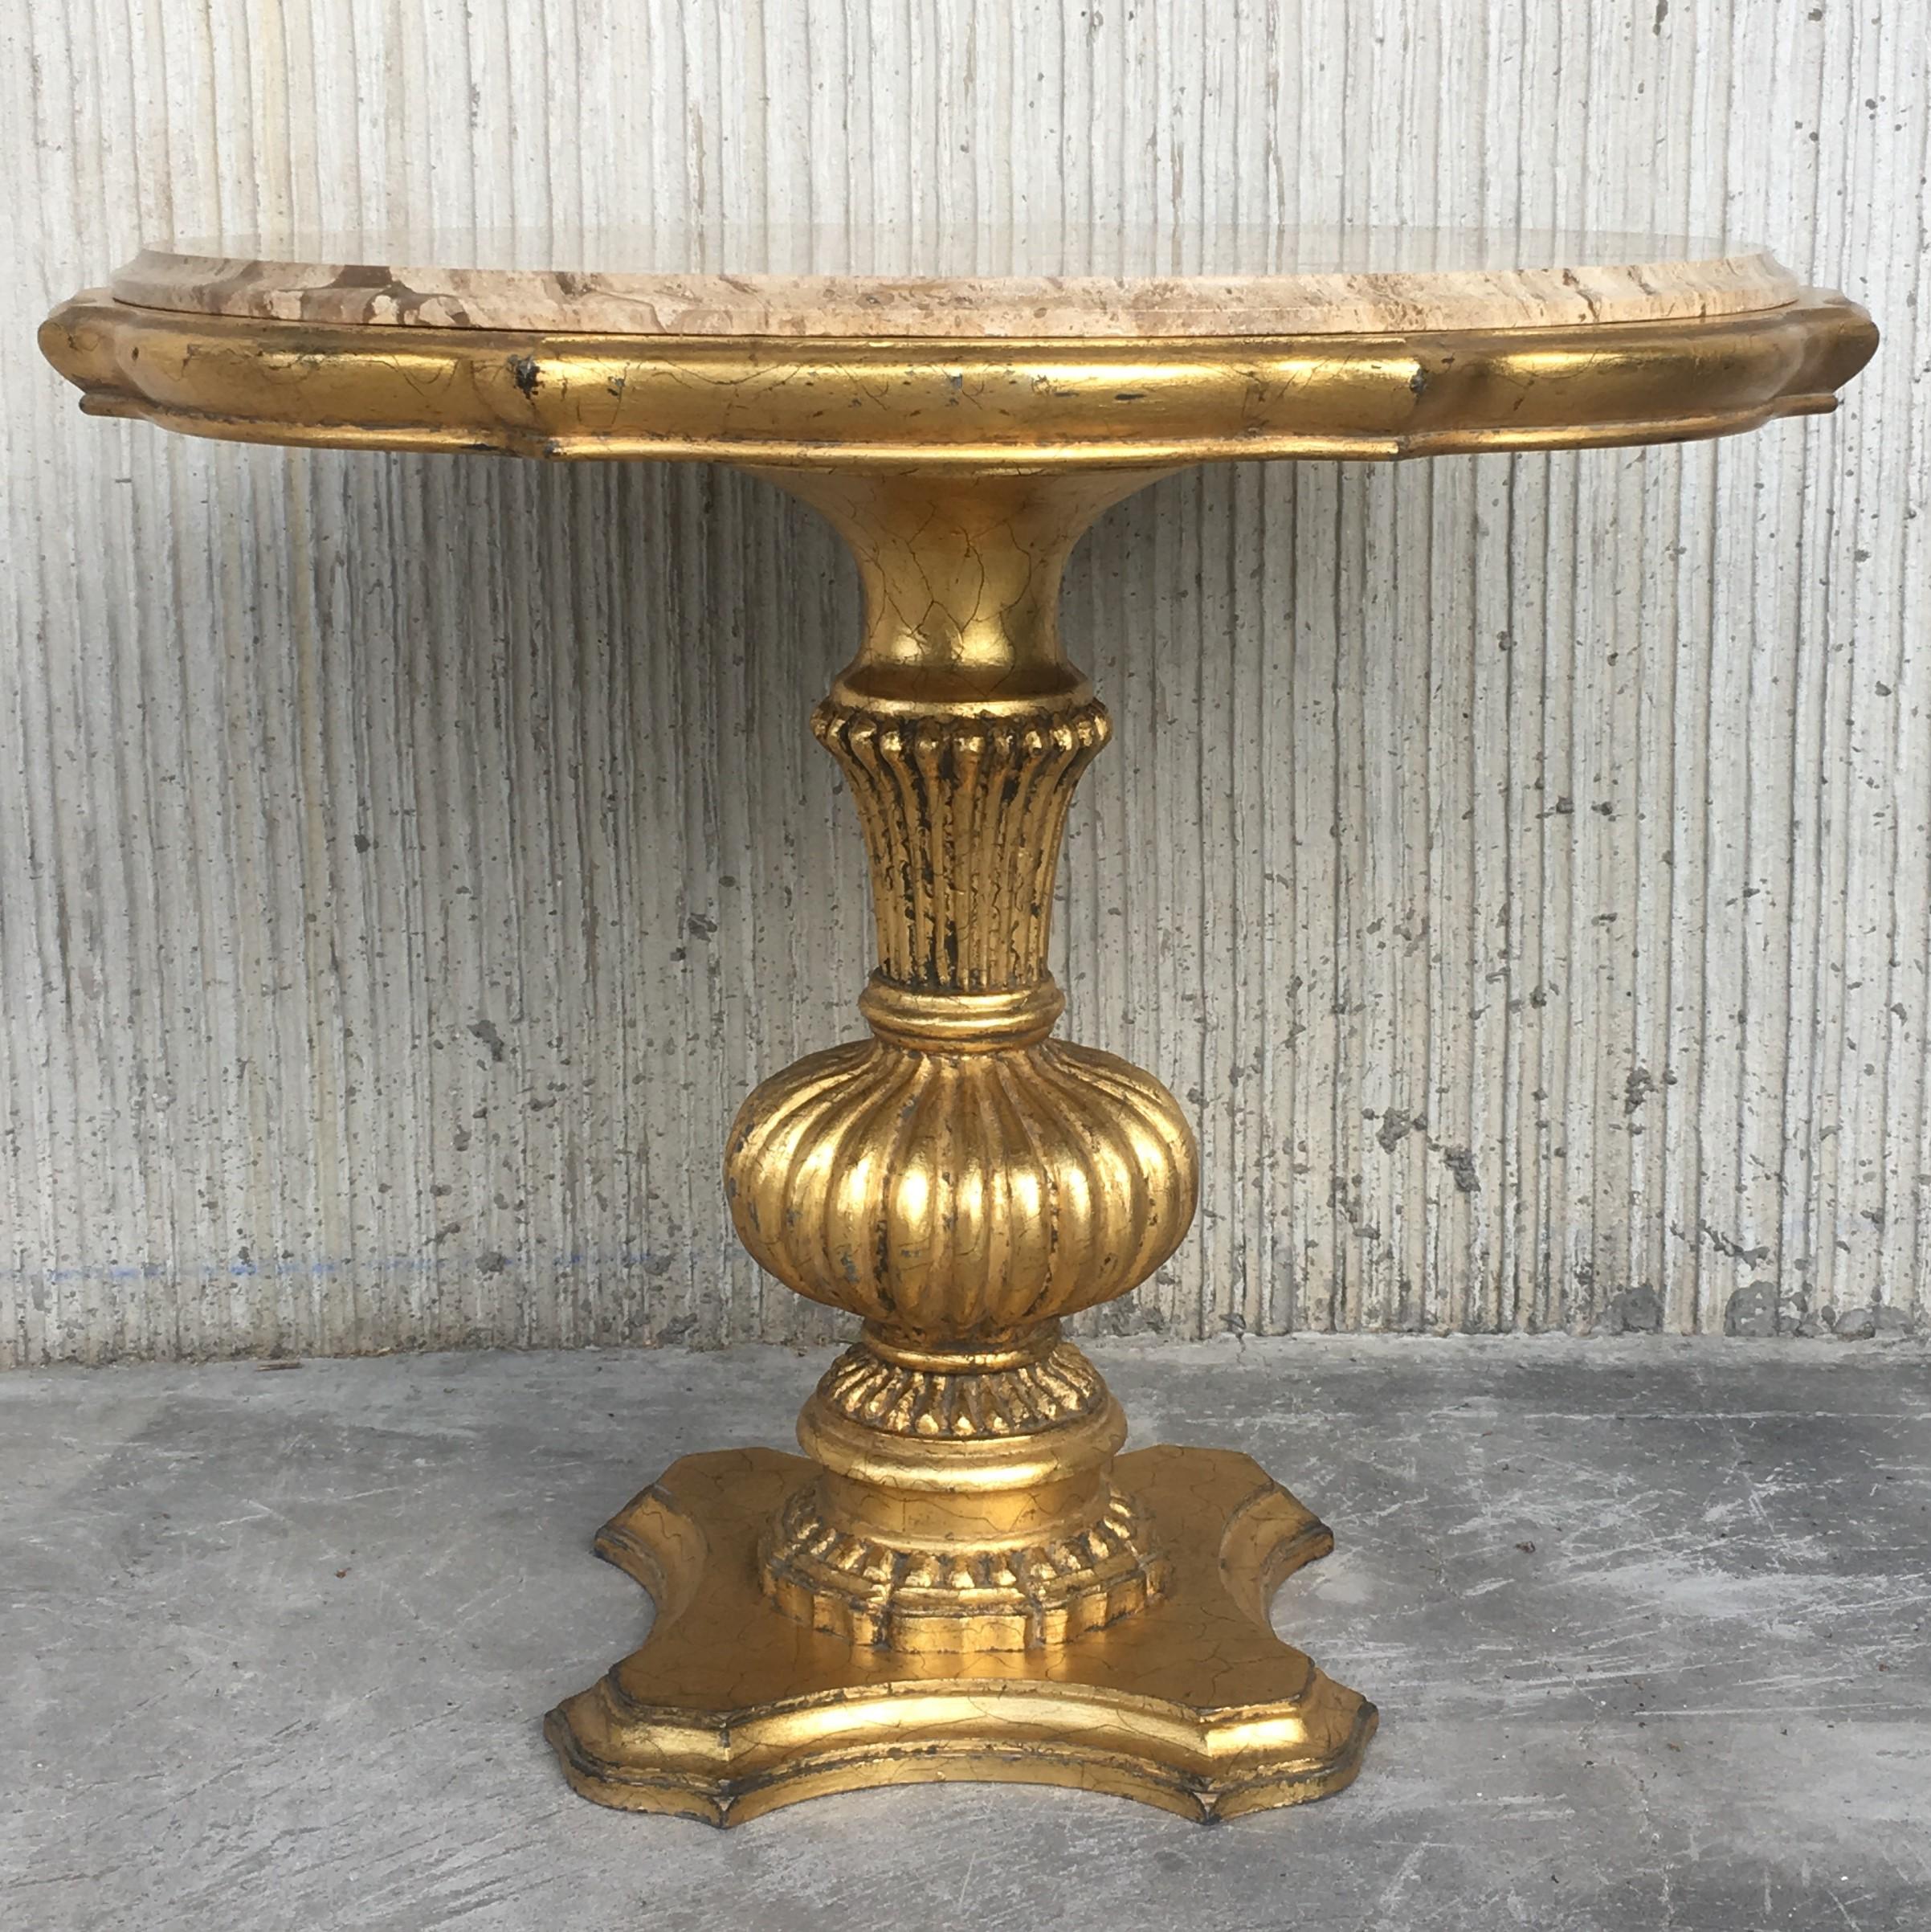 Giltwood Hollywood Regency Italian style marble-top low table. Item details solid wood pedestal bases, nicely carved details, distressed gold finish and round marble tops, circa early to mid-20th century, Spain.
Measurements: 23.52